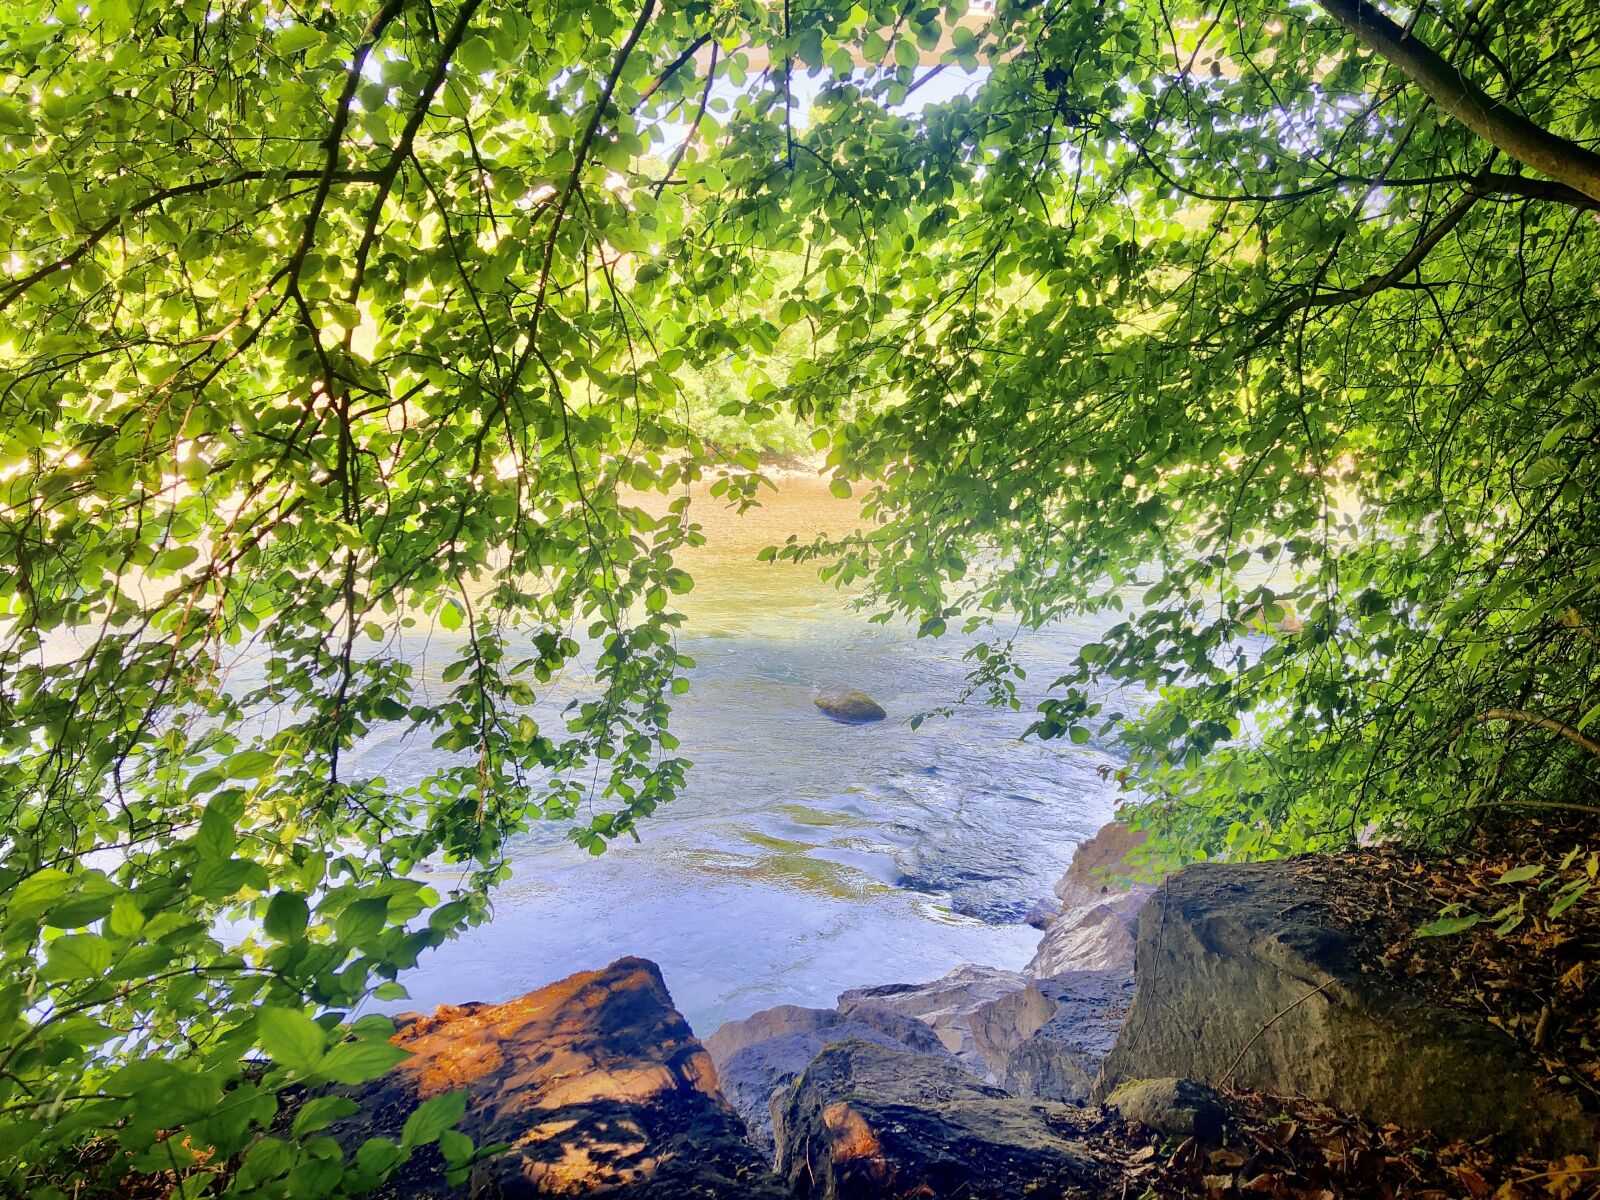 iPhone X back camera 4mm f/1.8 sample photo. Nature, creek, river photography